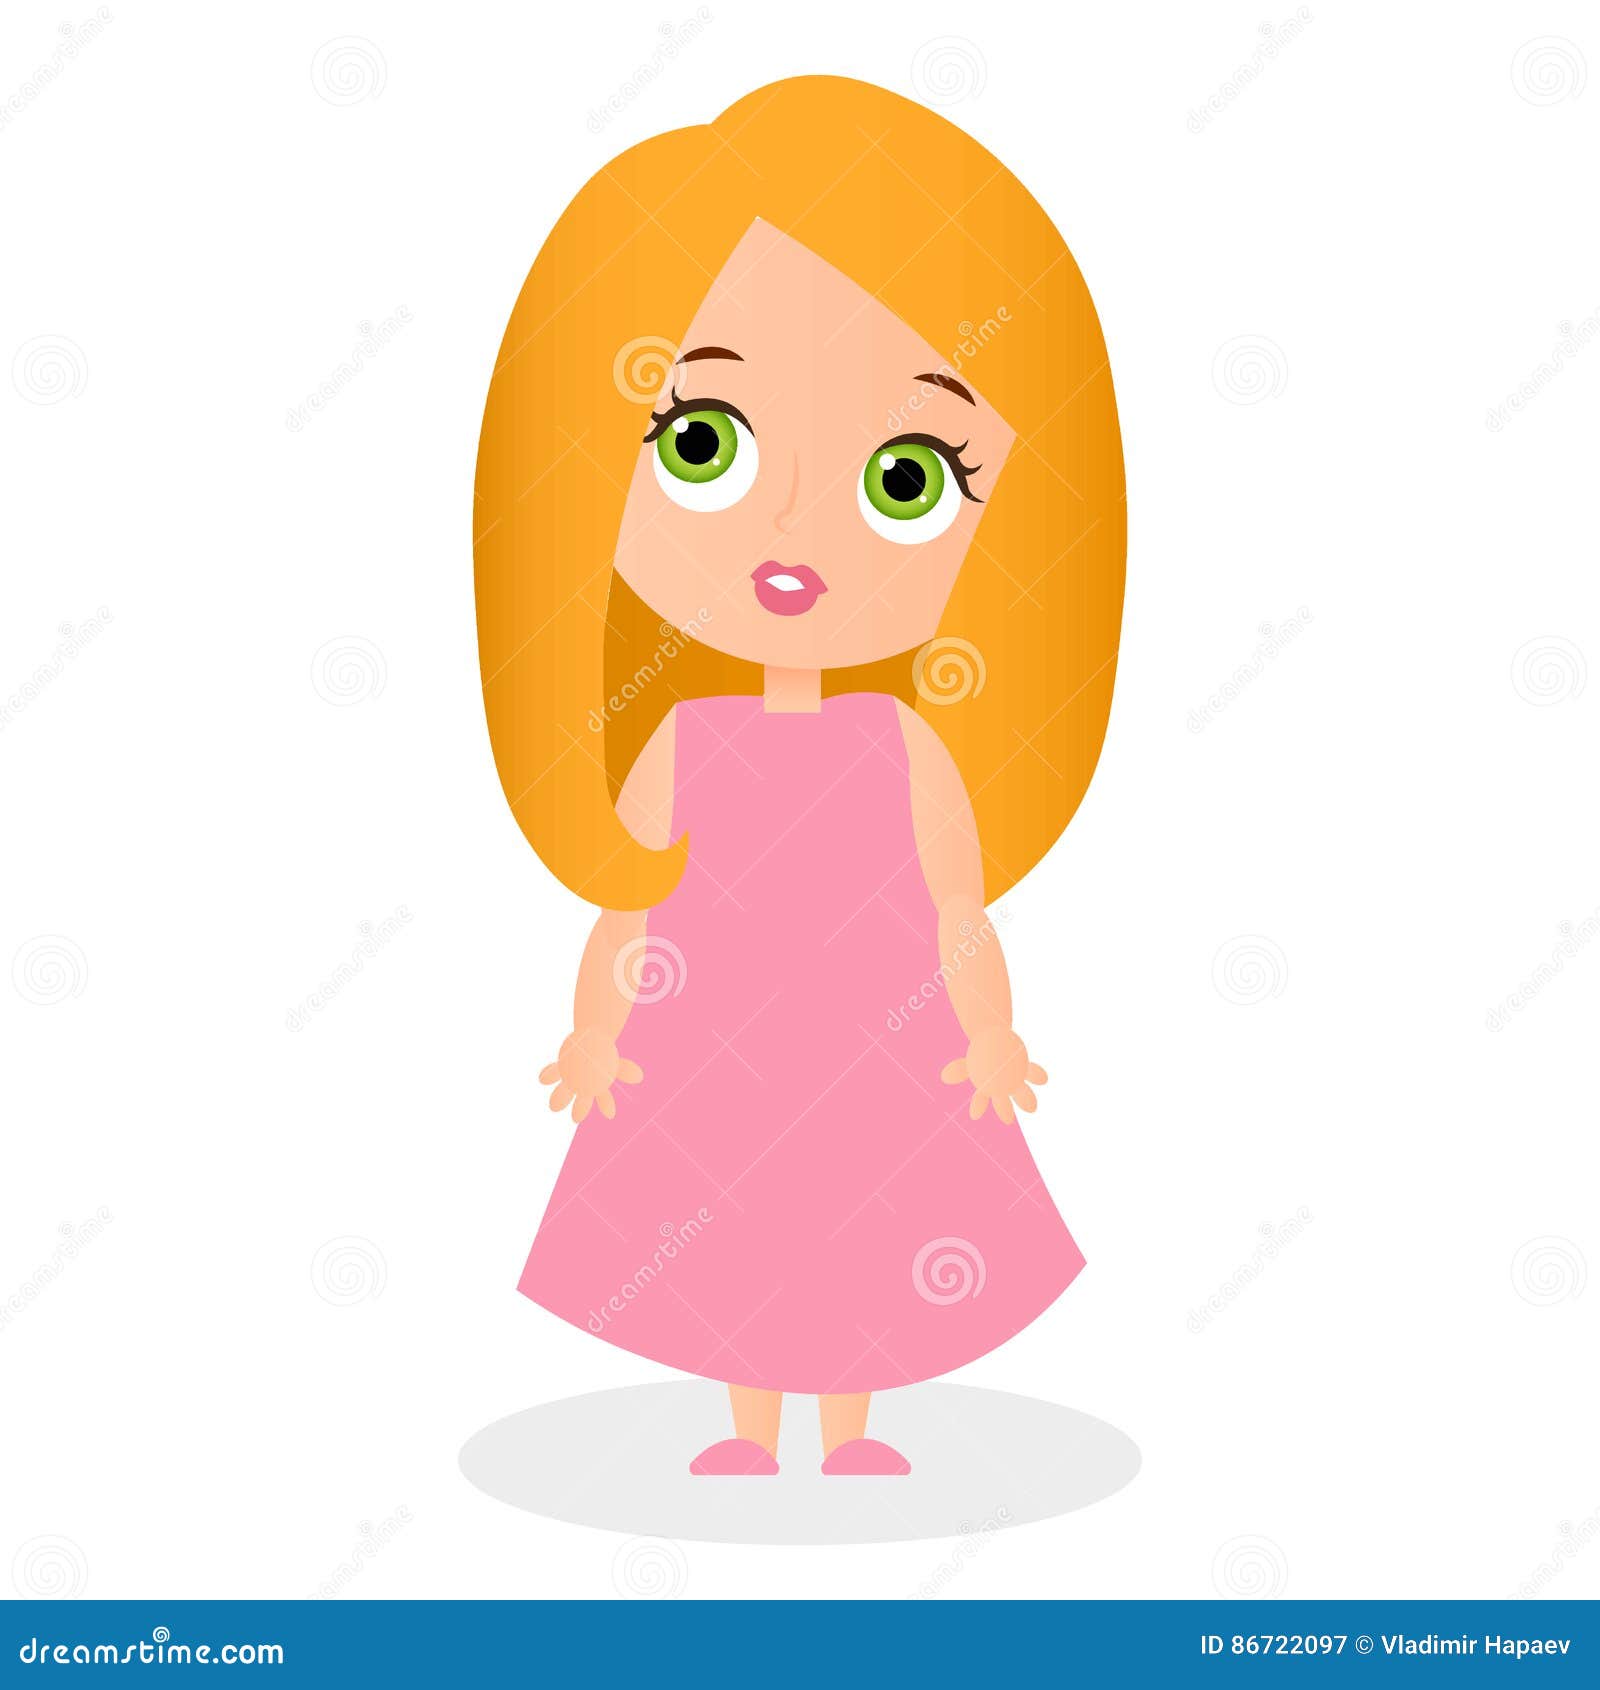 Cute Girl Cartoon Character. Vector Illustration Eps 10 Isolated on White  Background. Flat Cartoon Style. Stock Illustration - Illustration of  banner, pink: 86722097